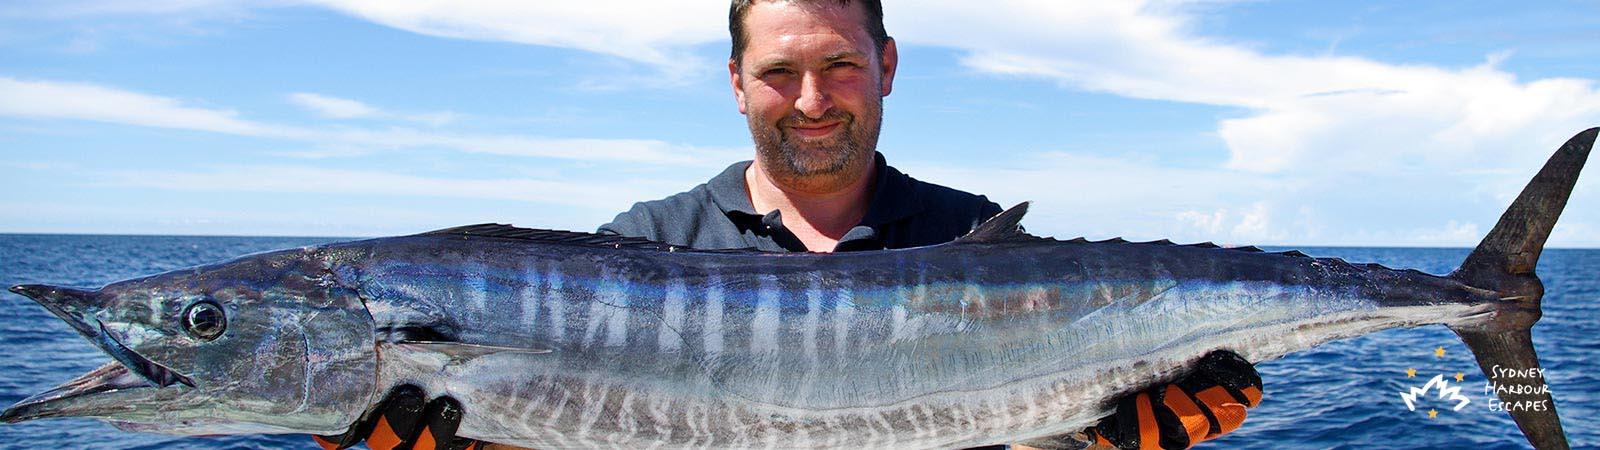 Offshore Fishing Tours Sydney Banner